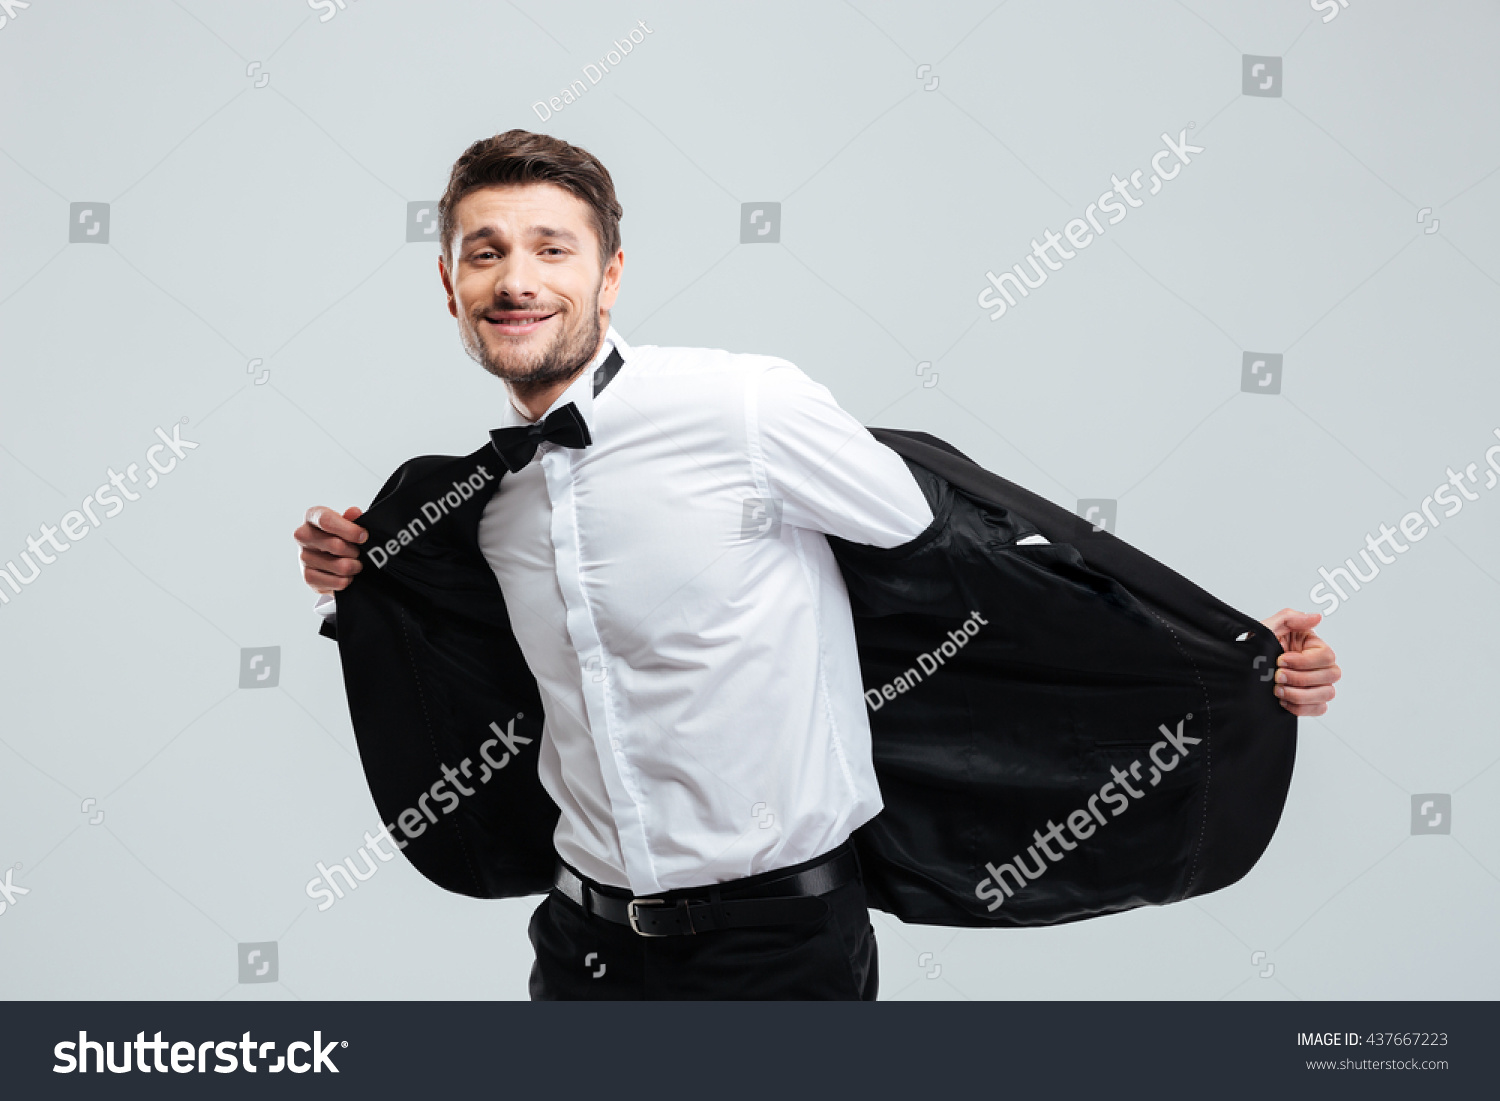 537 Man taking off his jacket Images, Stock Photos & Vectors | Shutterstock